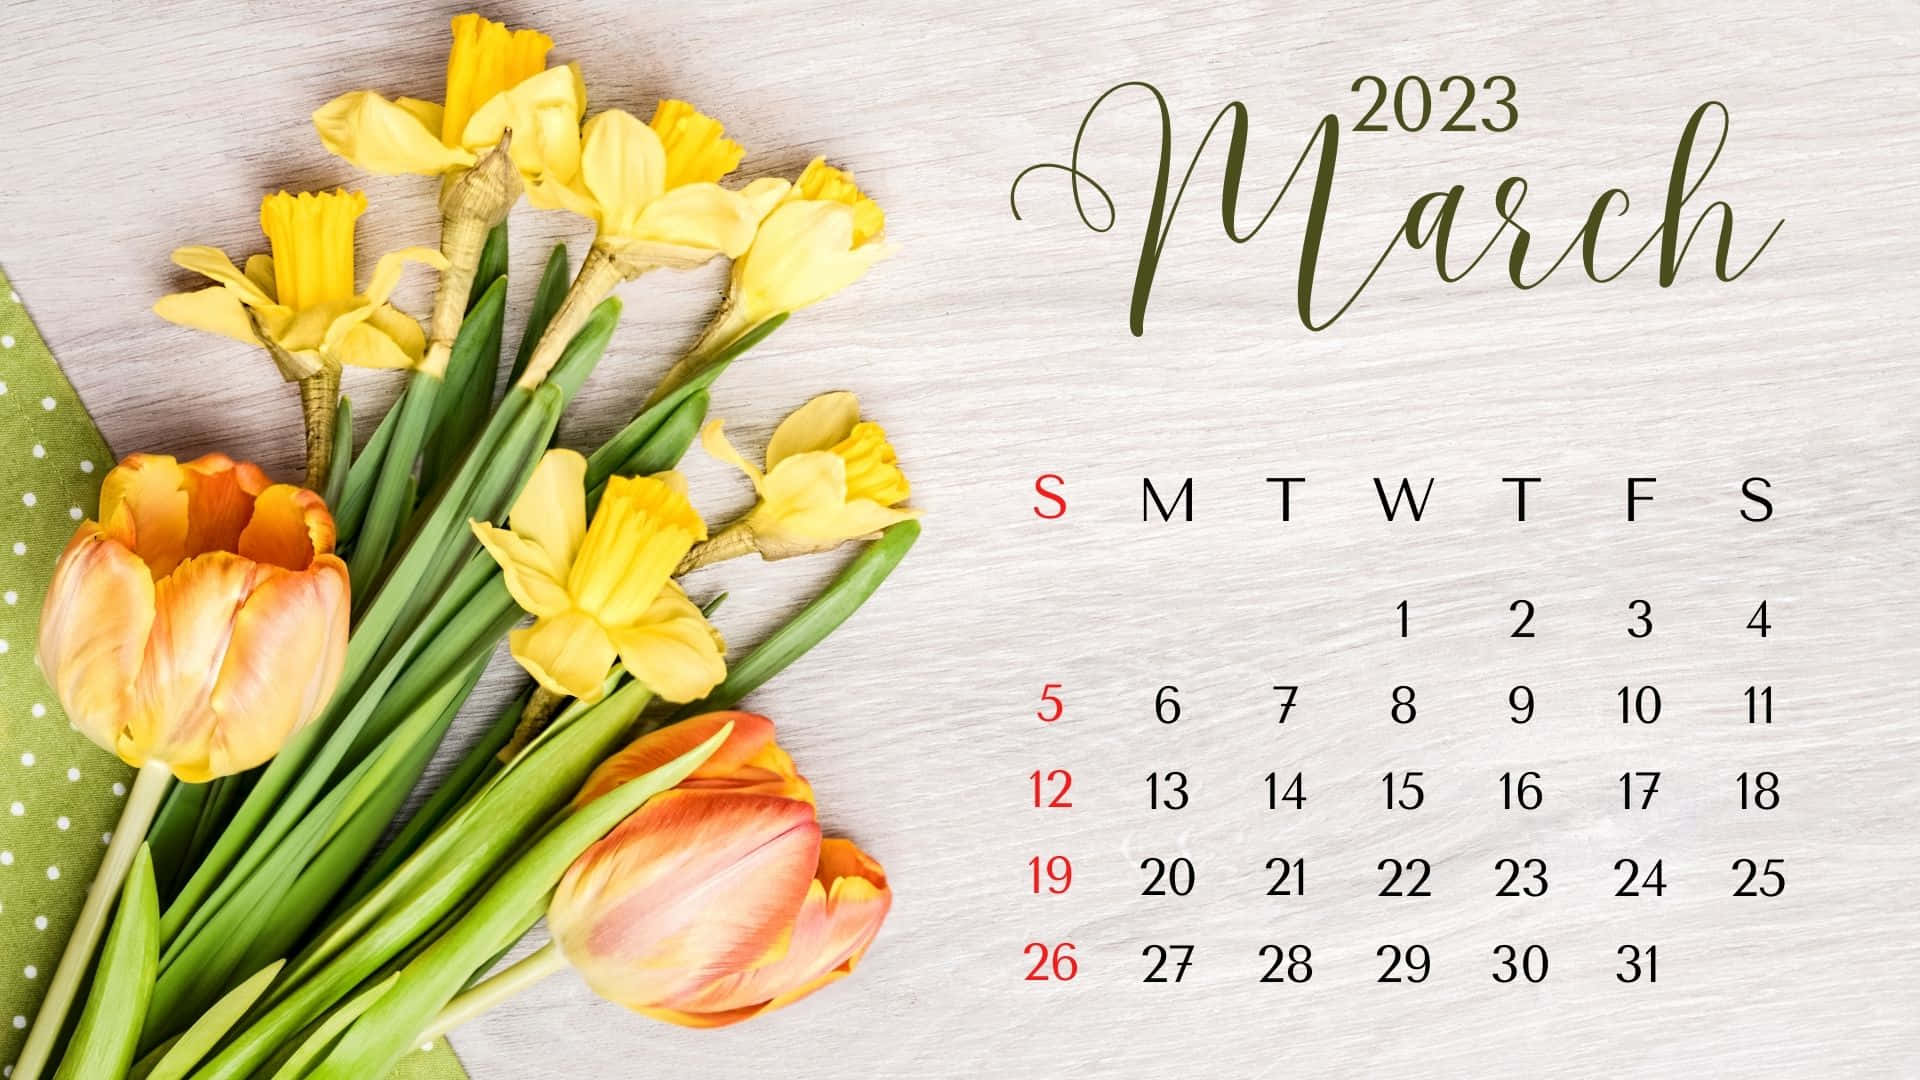 A Calendar With Daffodils And A Yellow Flower Wallpaper